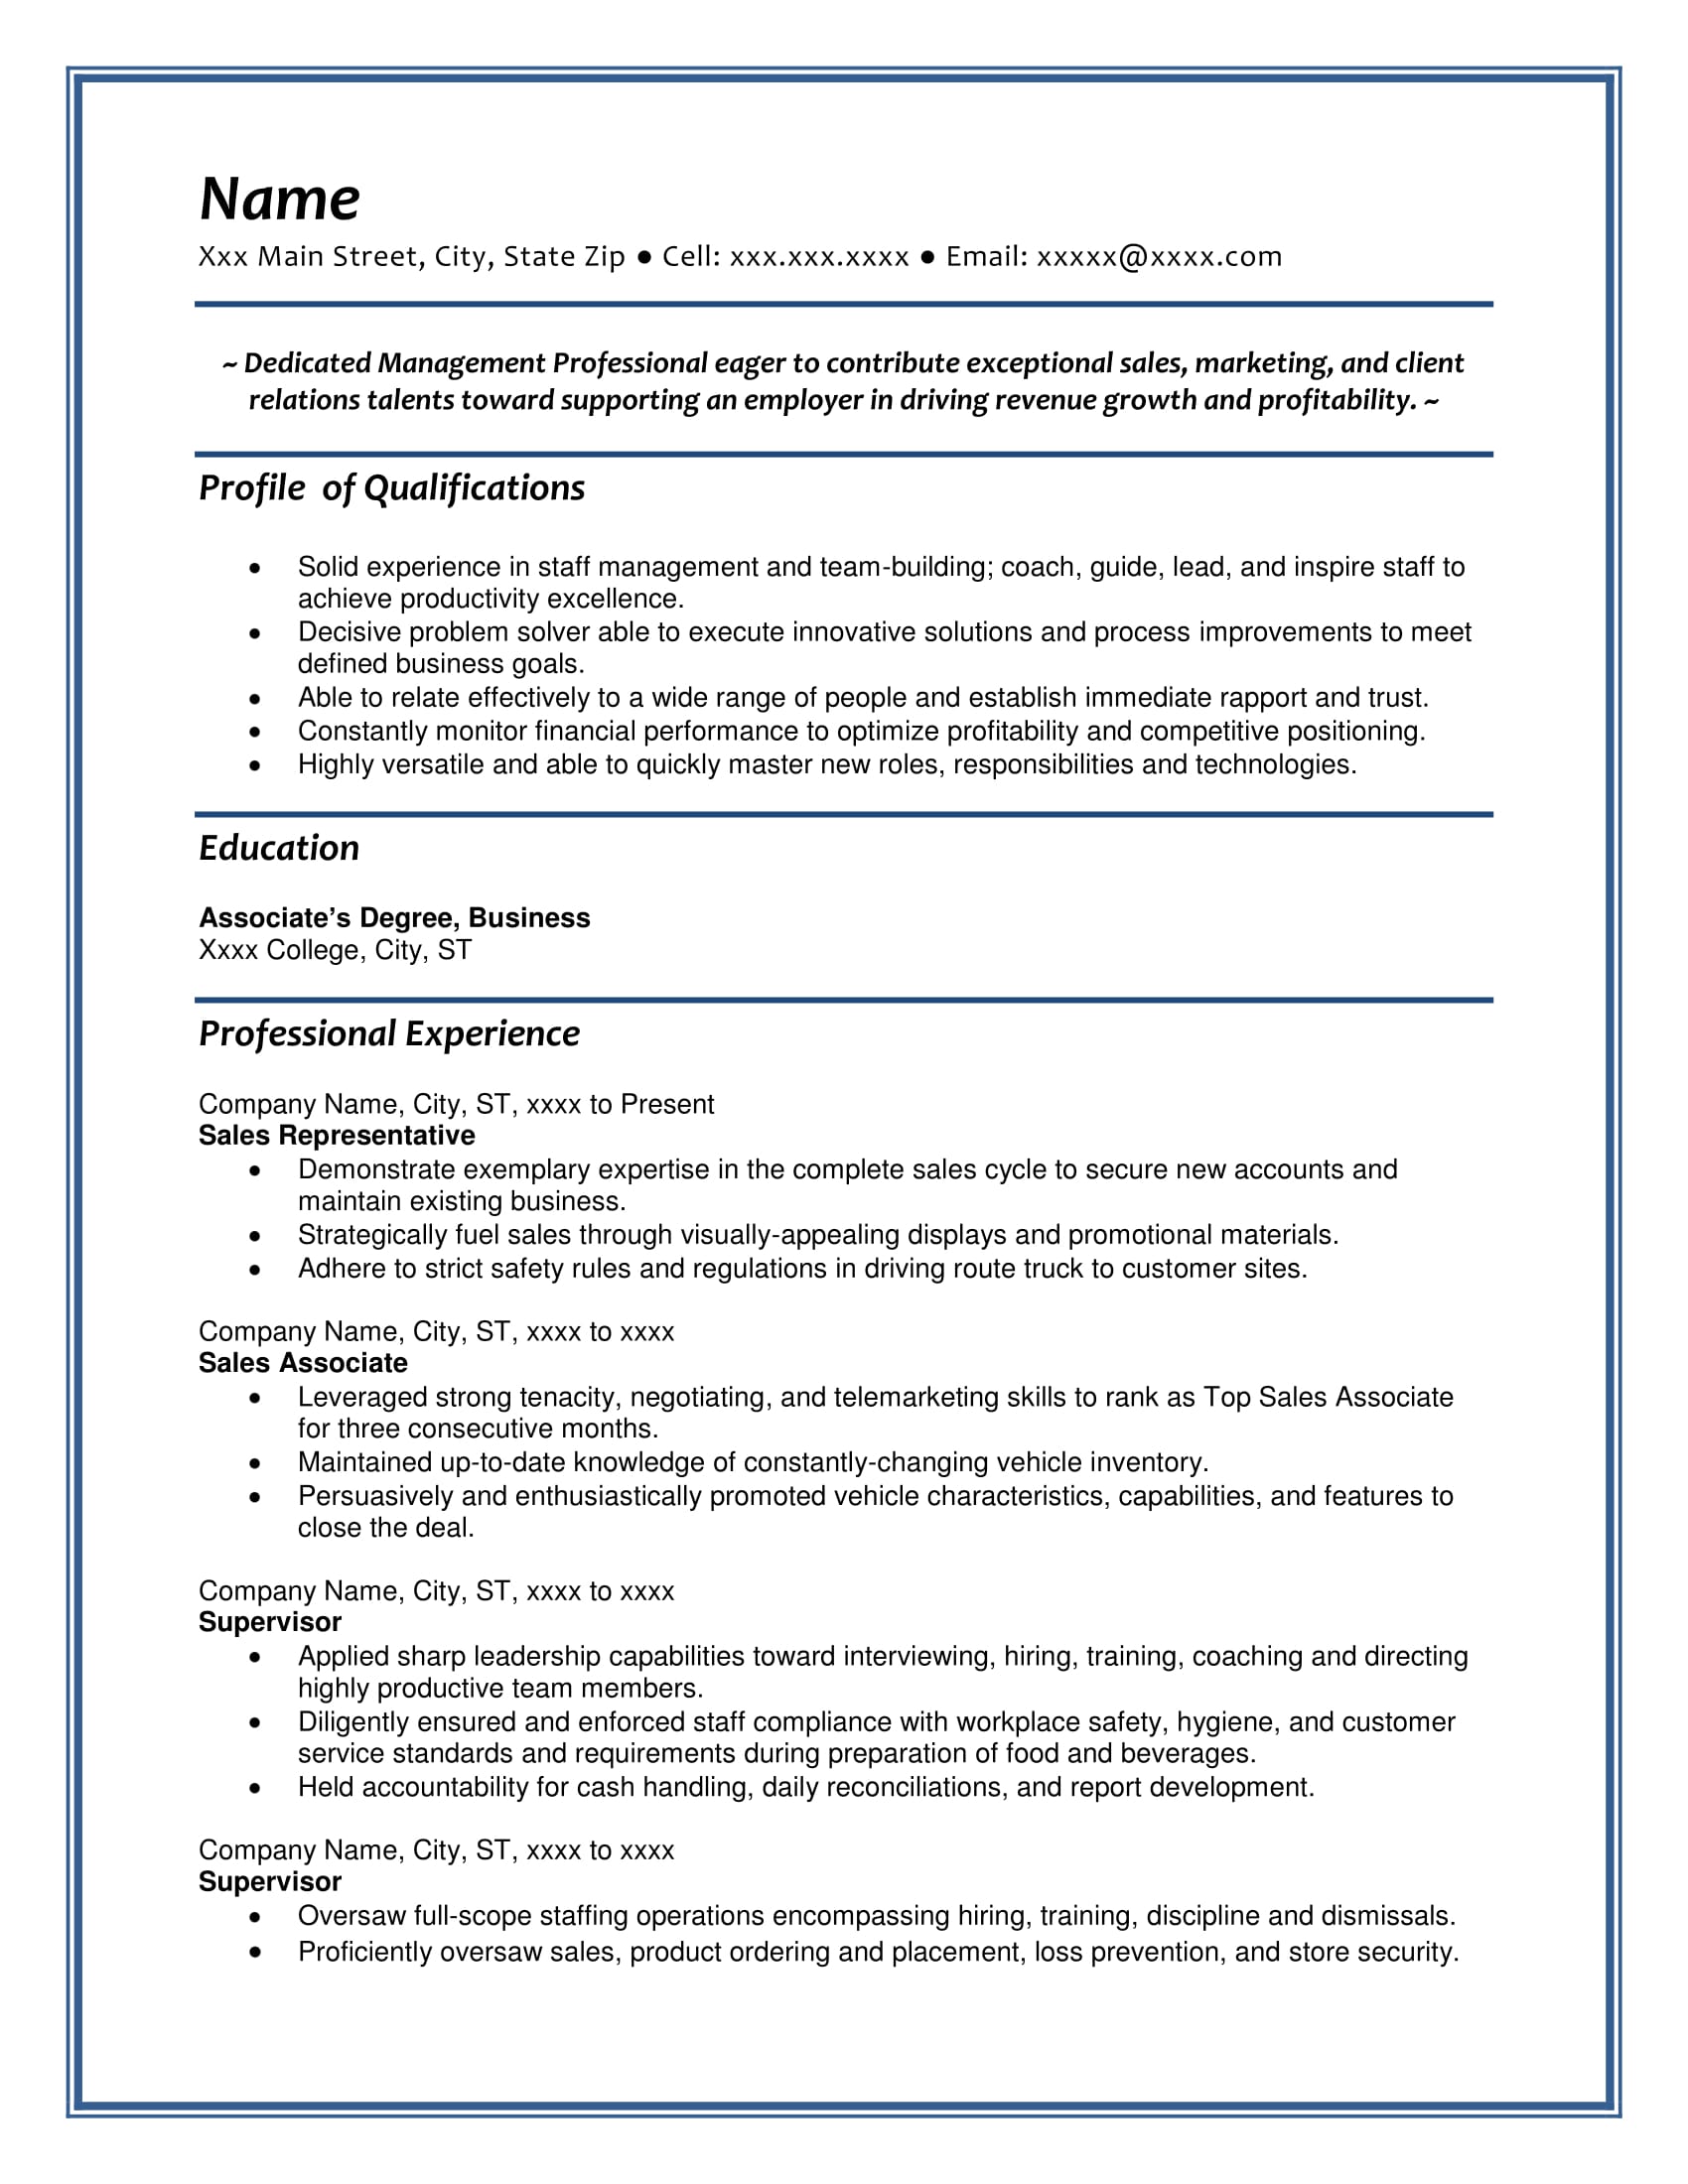 online resume writing prices